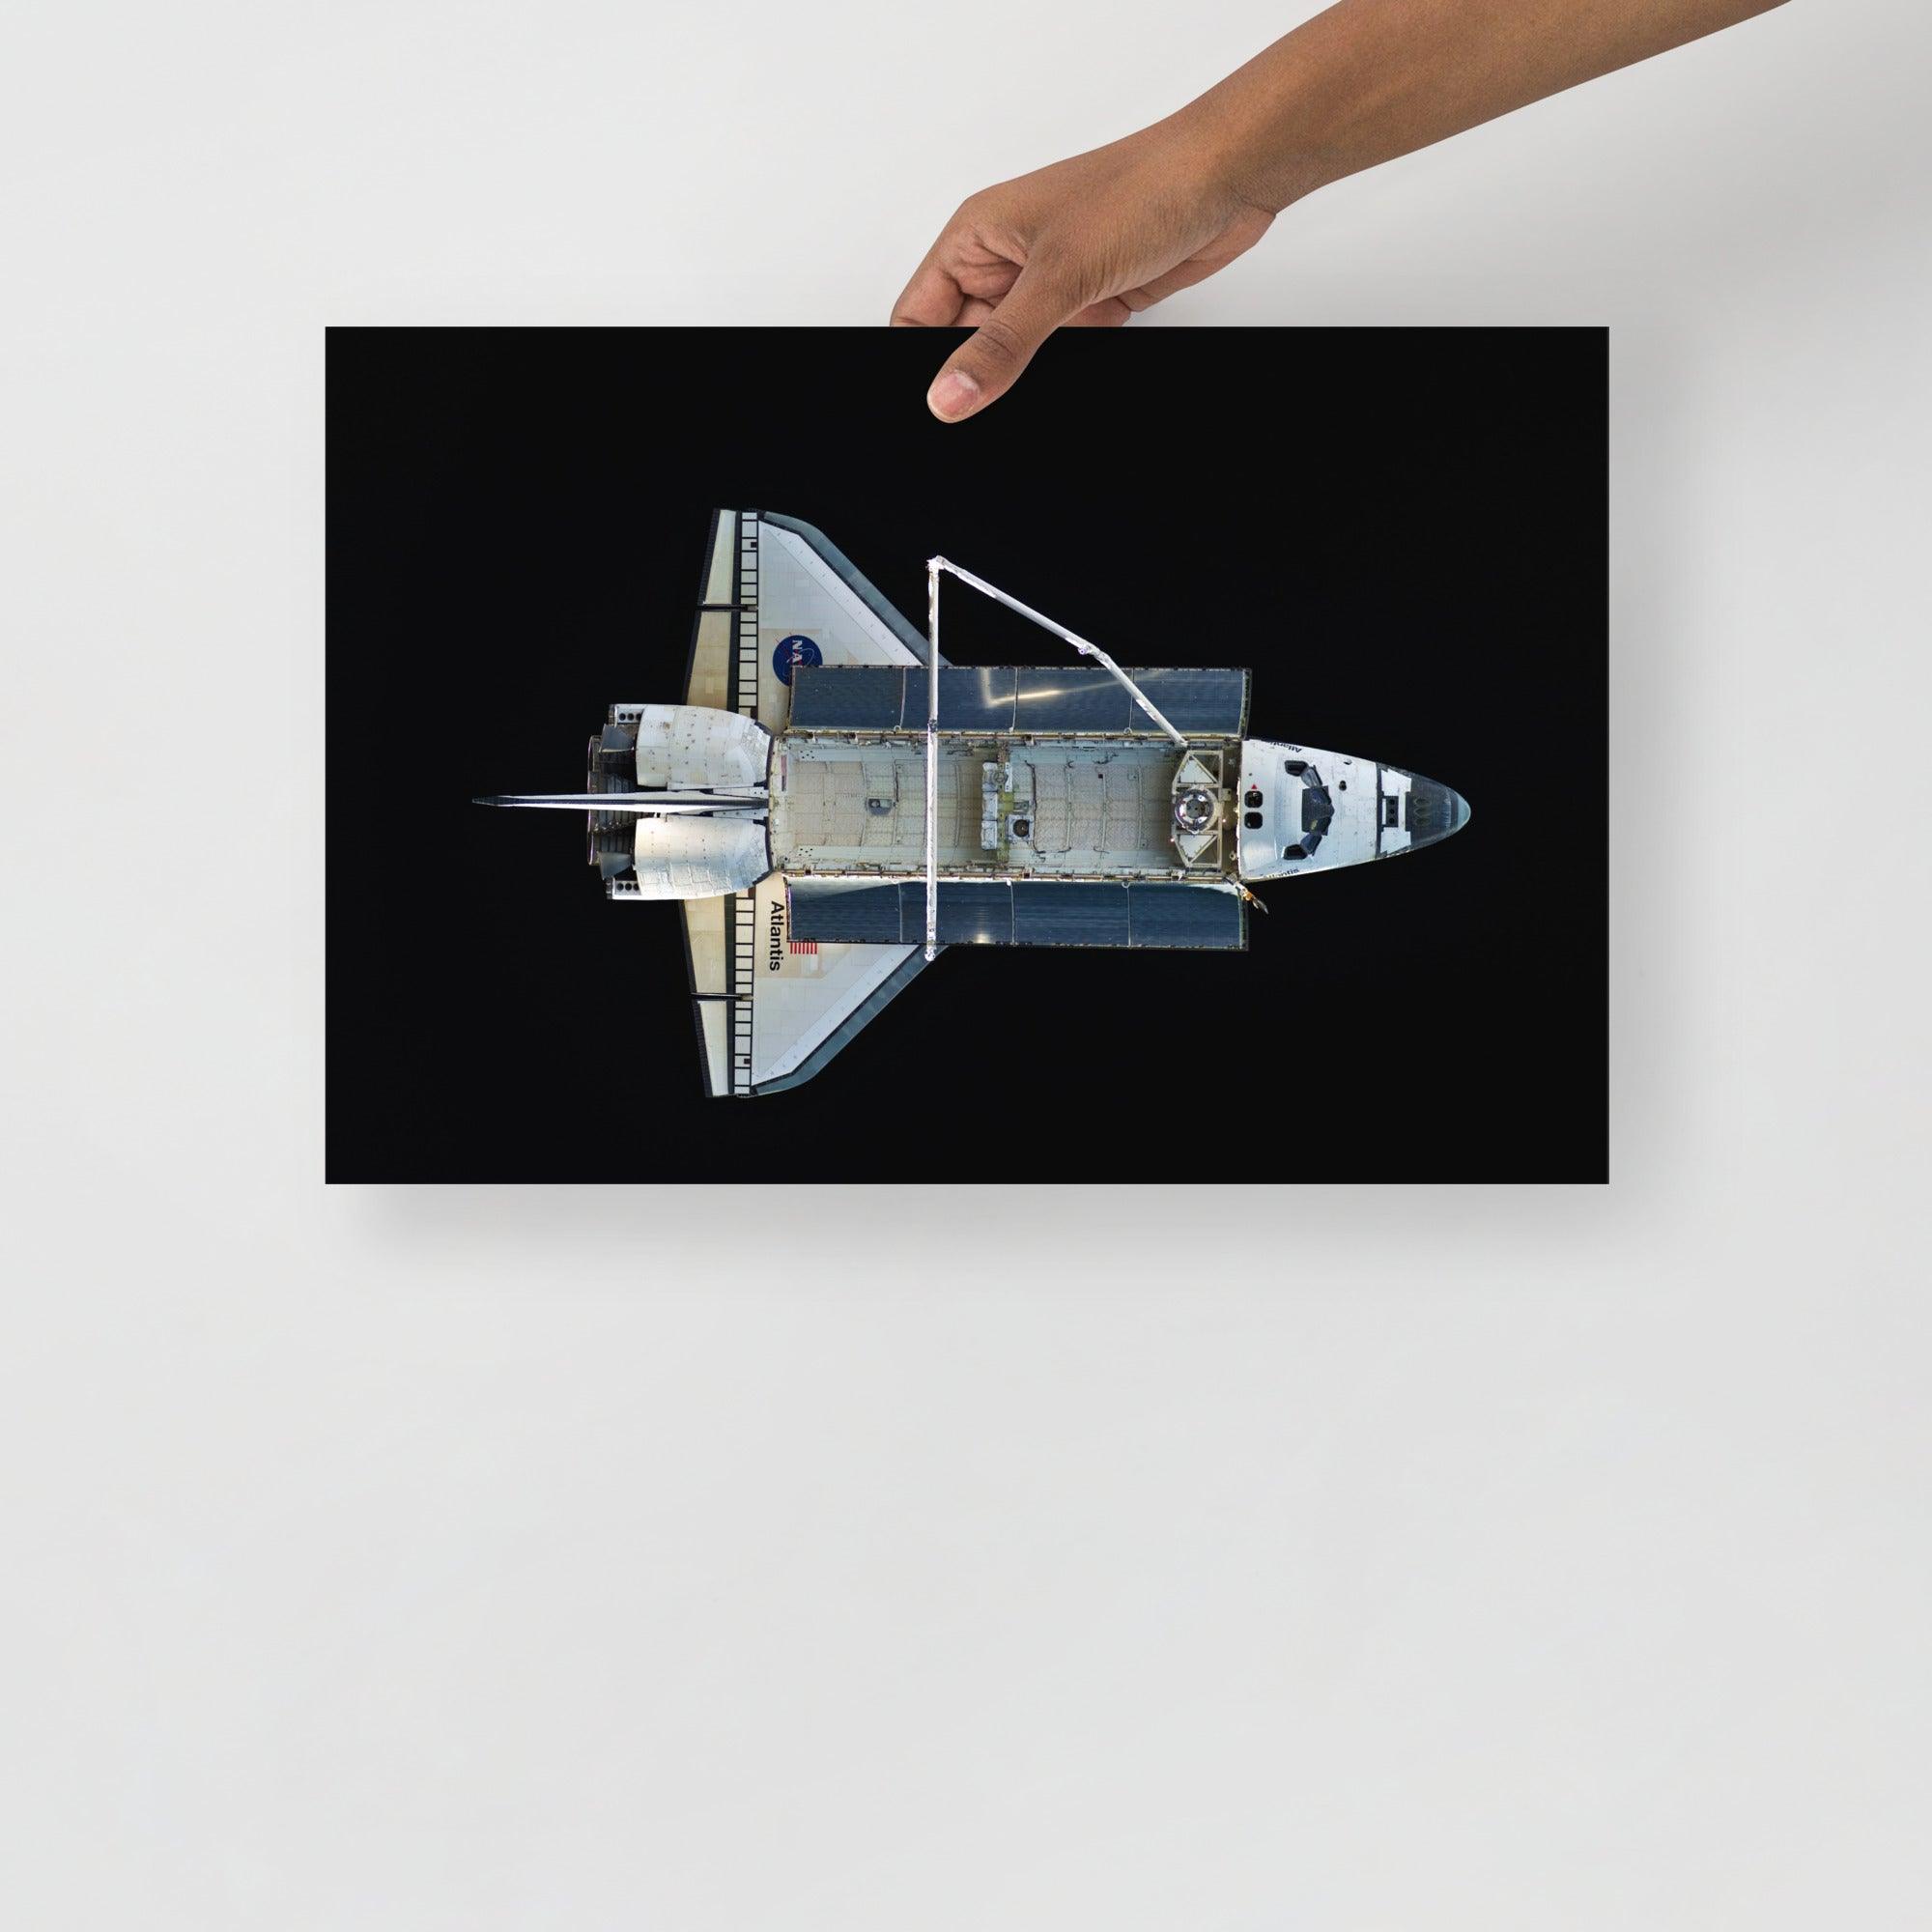 A Space Shuttle Atlantis poster on a plain backdrop in size 12x18”.